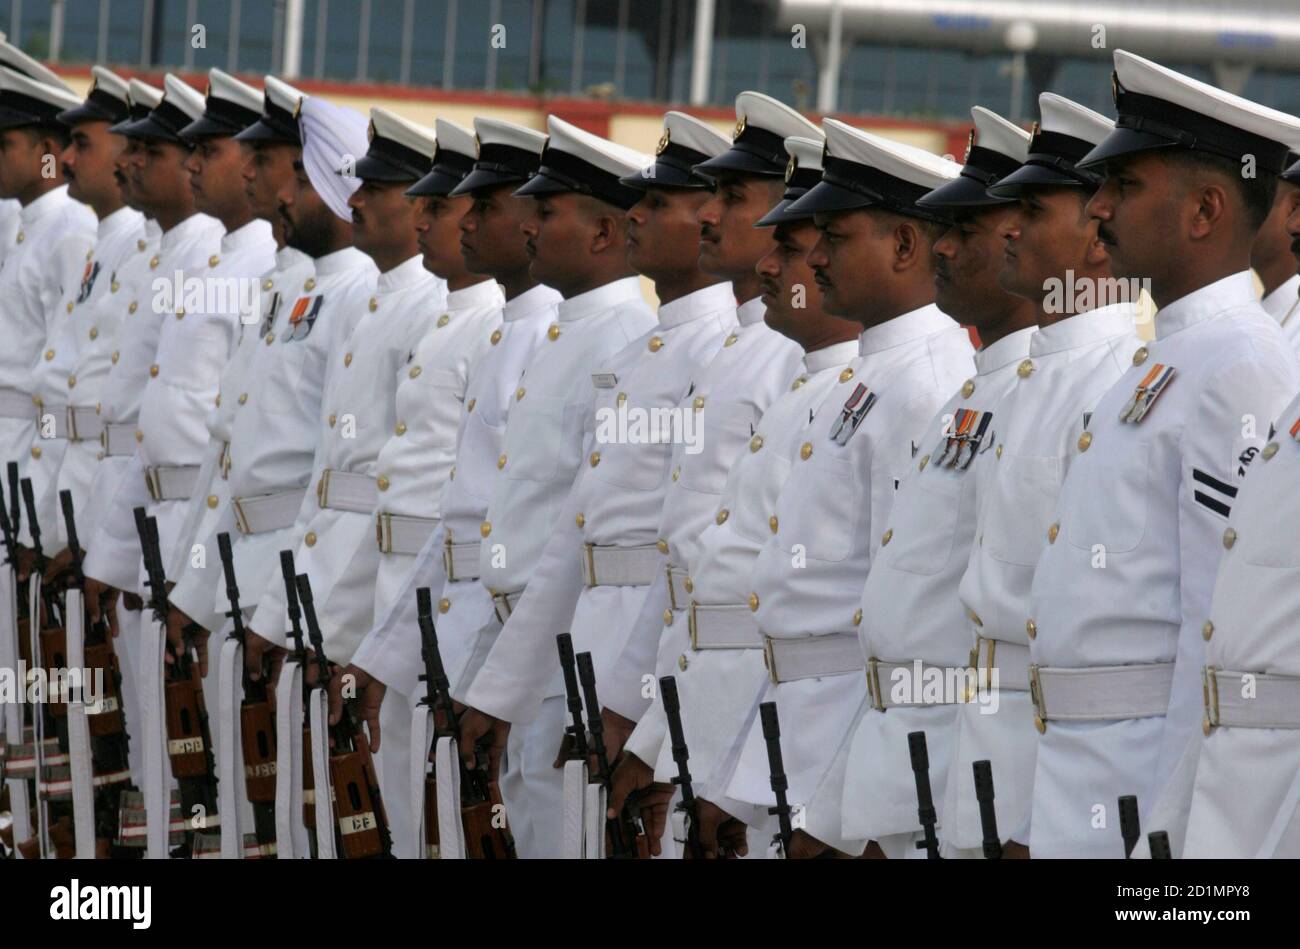 Sailors of Indian Coast Guard take part in a march during the commissioning ceremony of Air enclave at Porbandar, 415 km (258 miles) west of the western Indian city of Ahmedabad, June 12, 2008. Indian Coast Guard Air enclave at Porbandar is the first air base of the service in Gujarat. The unit is safeguarding vast 1600 km (994 miles) coastline which includes sensitive international Maritime border with Pakistan, monitoring dense merchant ships traffic in gulf areas and surveillance in adjoining Exclusive Economic Zone (EEZ), a press release of Indian Coast Guard said.  REUTERS/Amit Dave  (IND Stock Photo